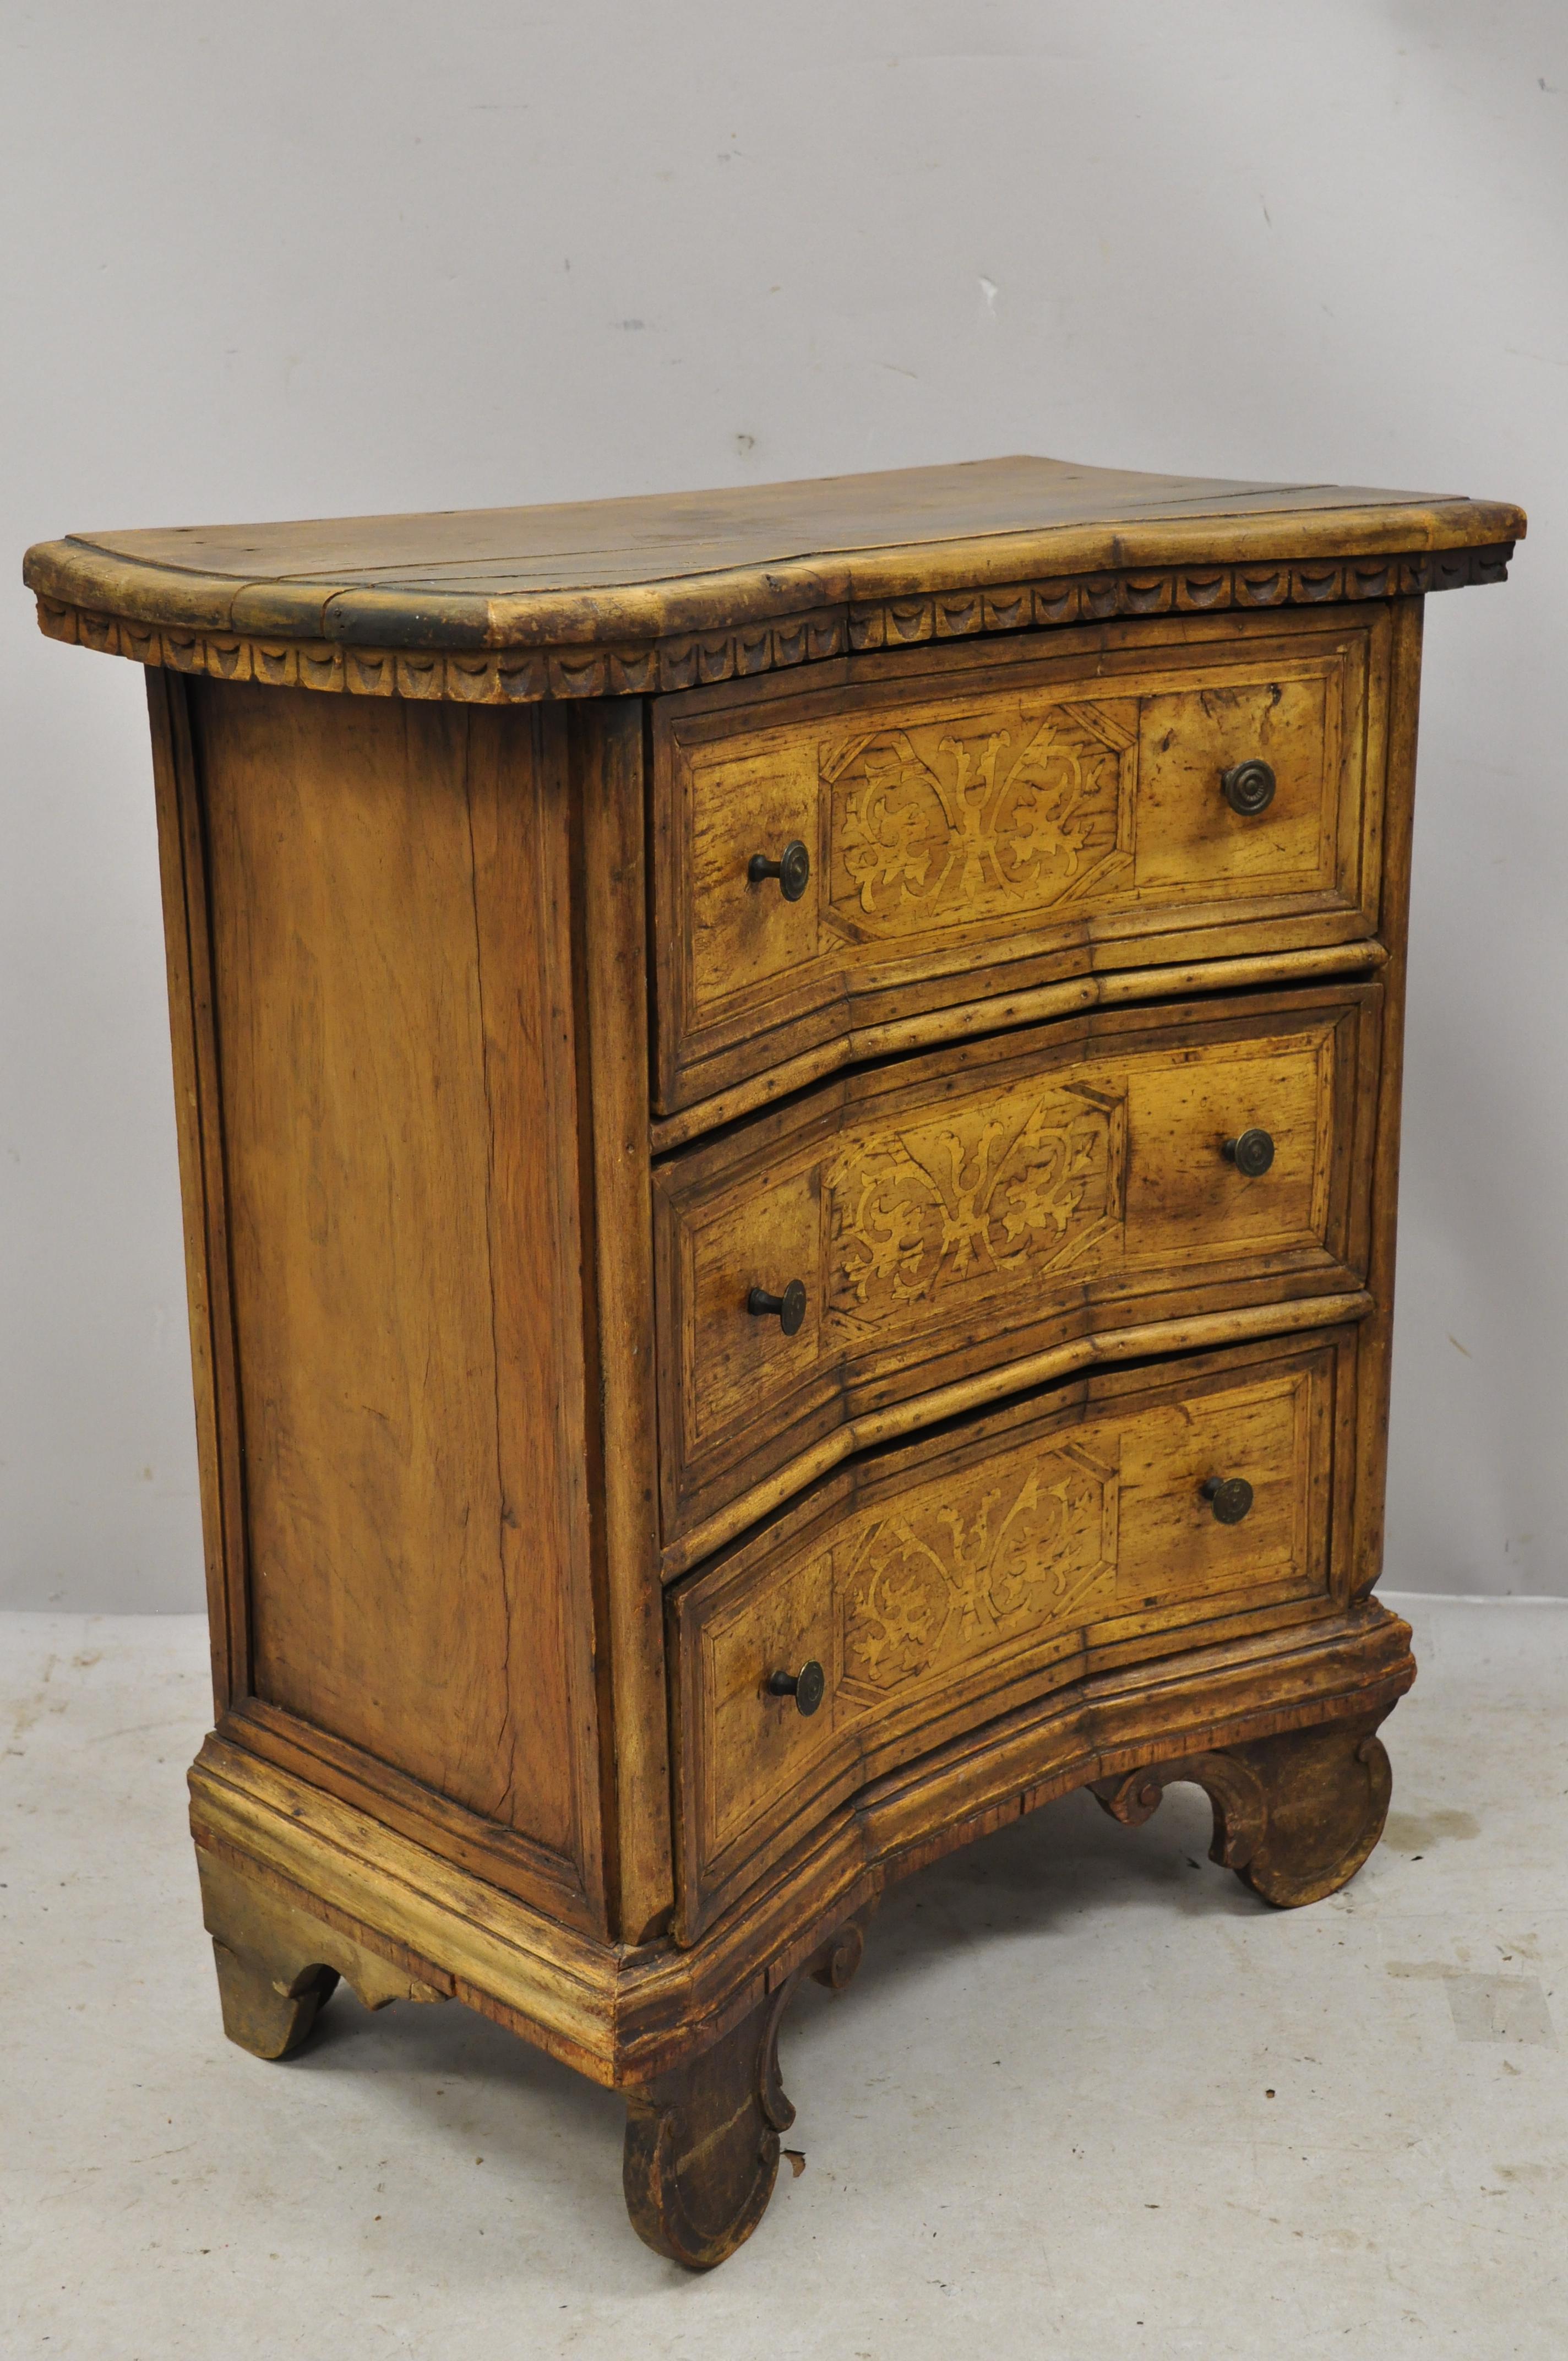 19th century antique Italian continental 3-drawer inlaid walnut commode chest nightstand table. Item features remarkable aged patina, solid wood construction, beautiful wood grain, nicely carved details, 3 dovetailed drawers, nice inlay, very nice